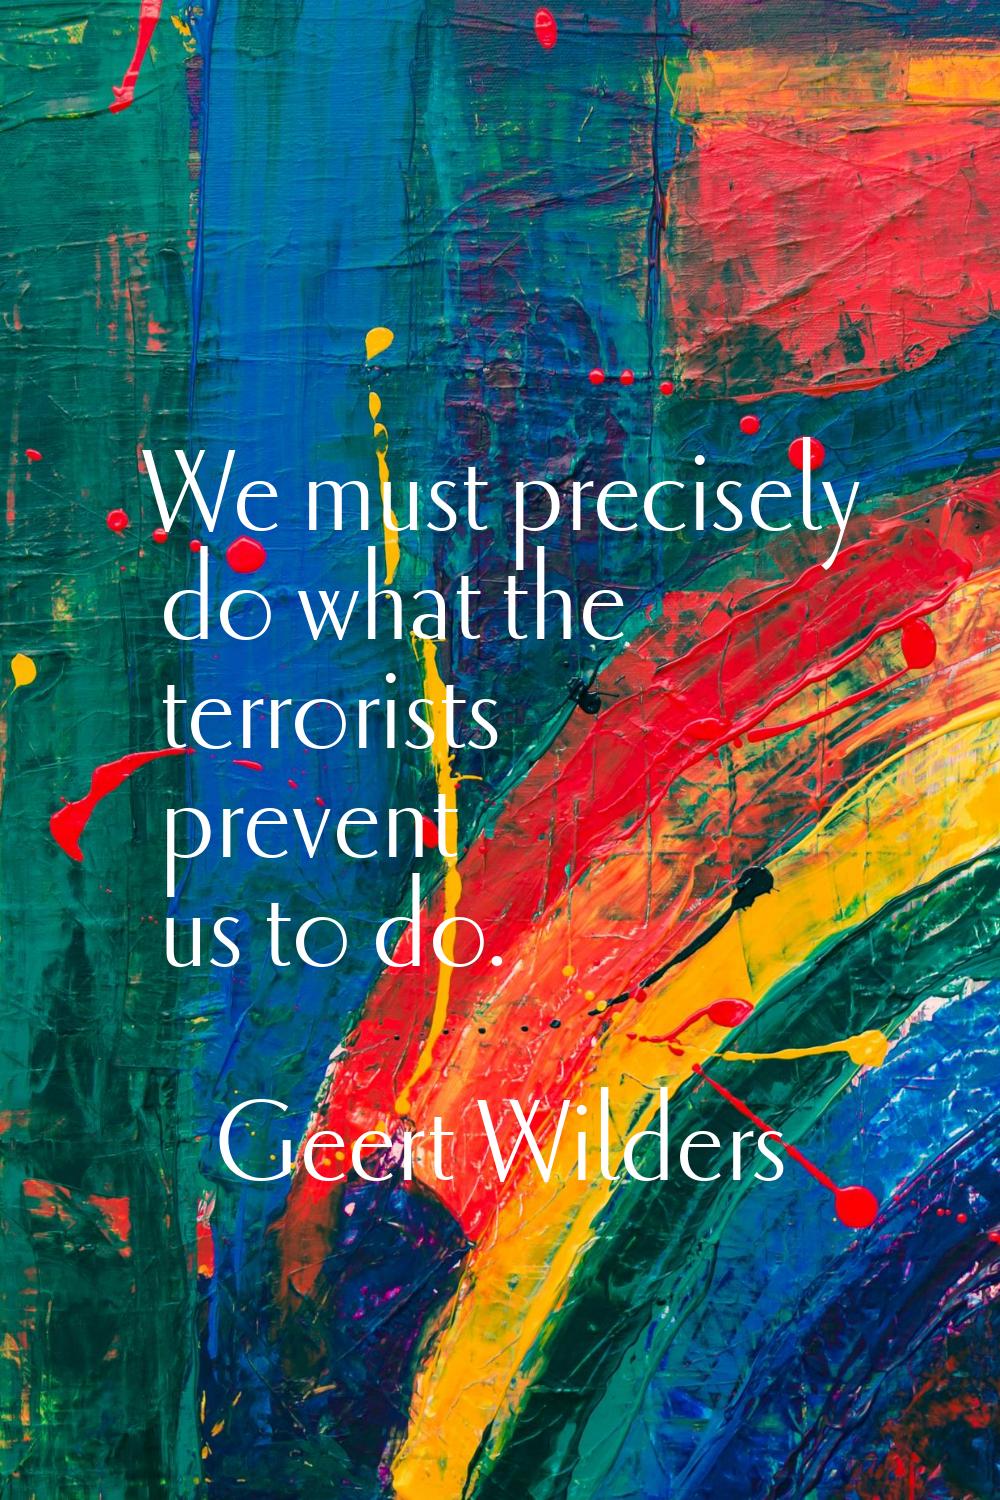 We must precisely do what the terrorists prevent us to do.